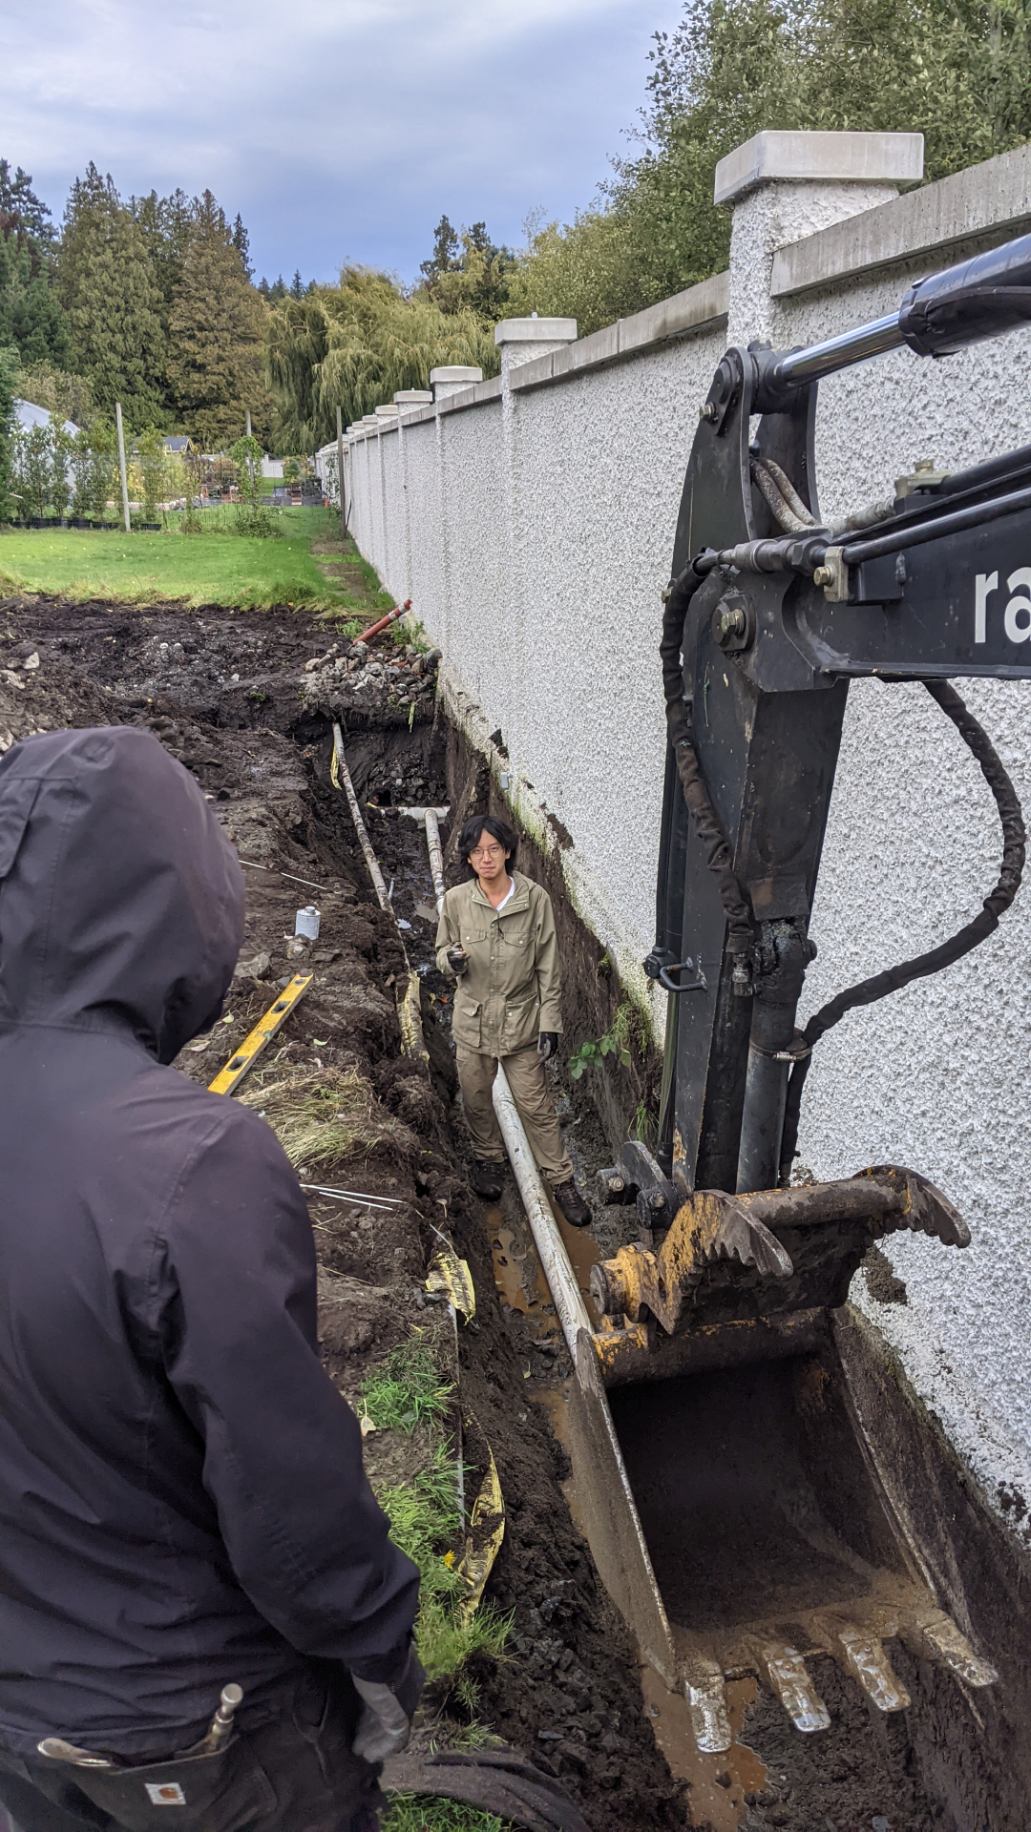 A mini excavator digging a trench for a perimeter drain system